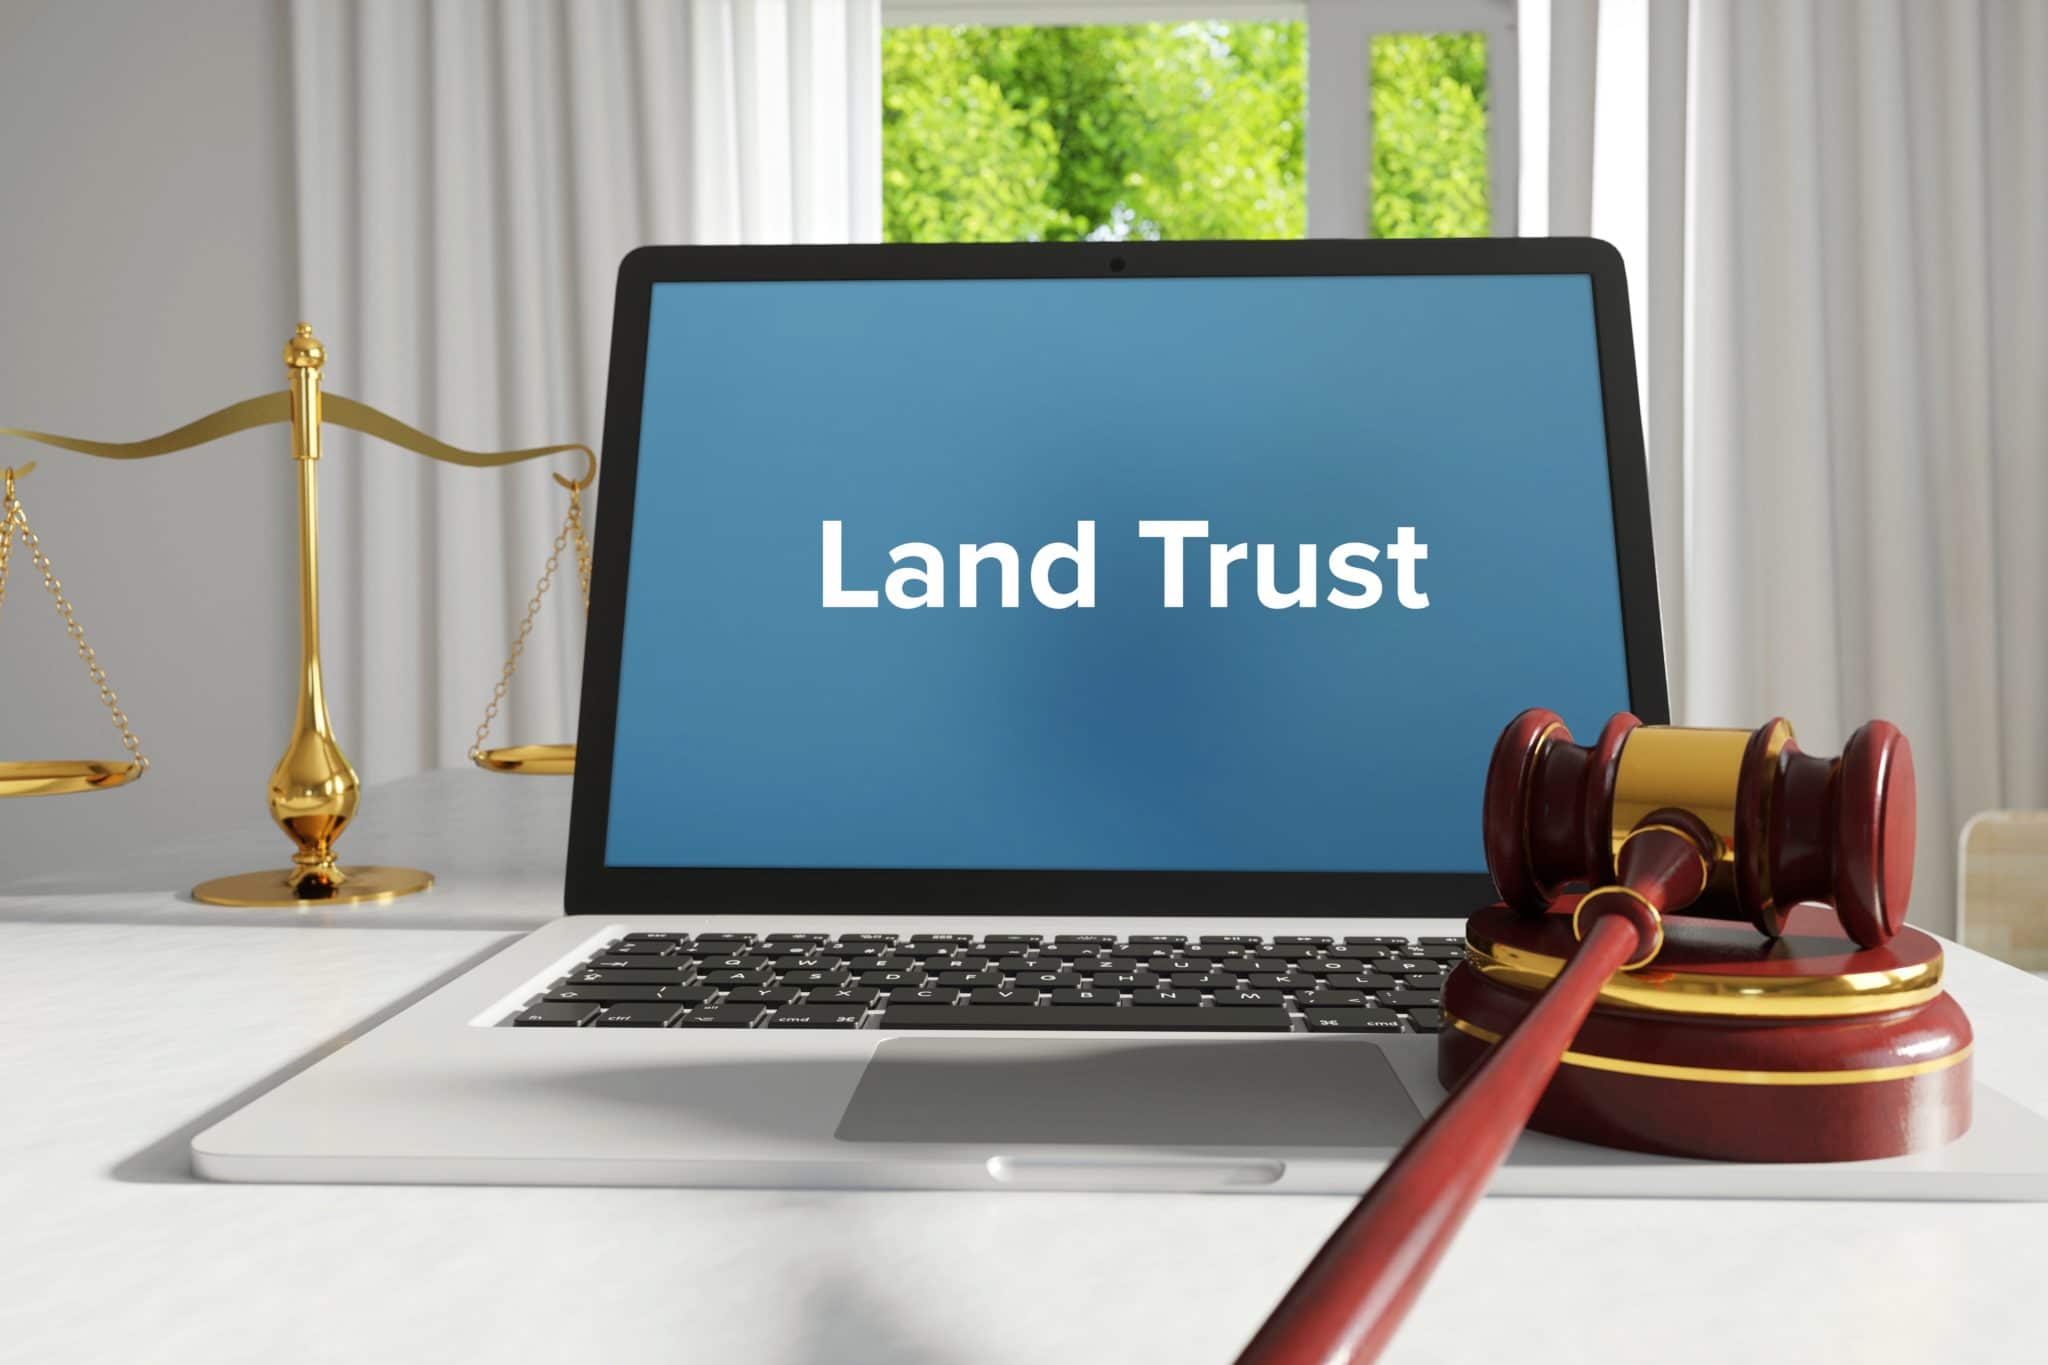 Land Trust – Law, Judgment, Web. Laptop in the office